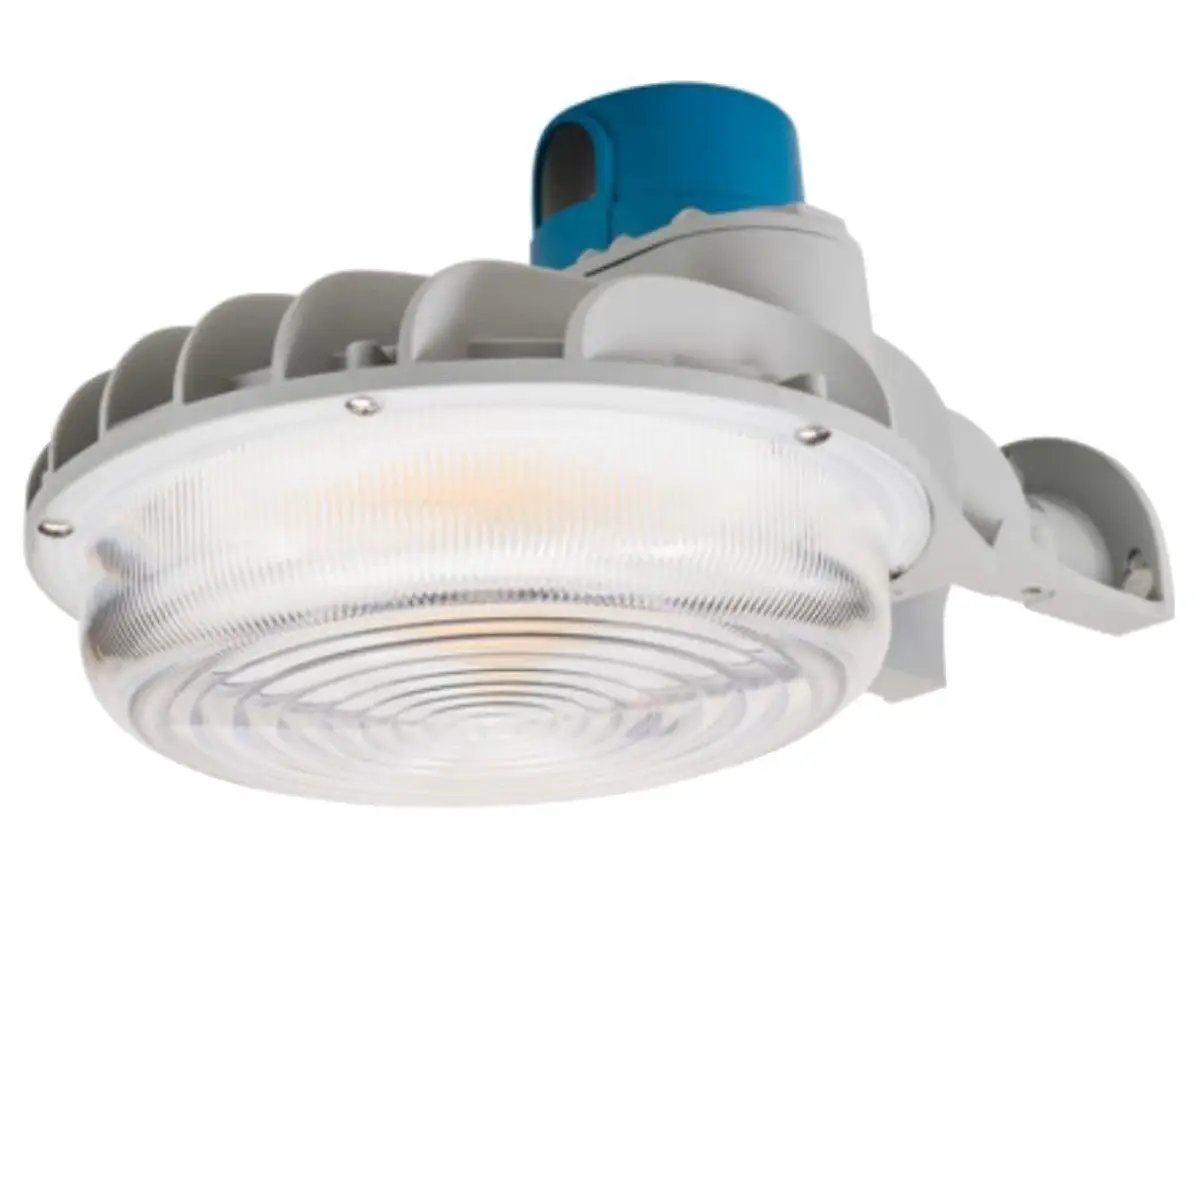 LED Dusk to Dawn Light: A versatile, energy-saving outdoor fixture by Keystone Technologies. Provides 5200-9250 lumens of CCT selectable lighting. Dimmable and motion sensor optional. UL Listed, RoHS Compliant, IP65 Rated, DLC Premium Listed. 13.62&quot;L x 9.13&quot;W x 7.36&quot;H. 5-year warranty.